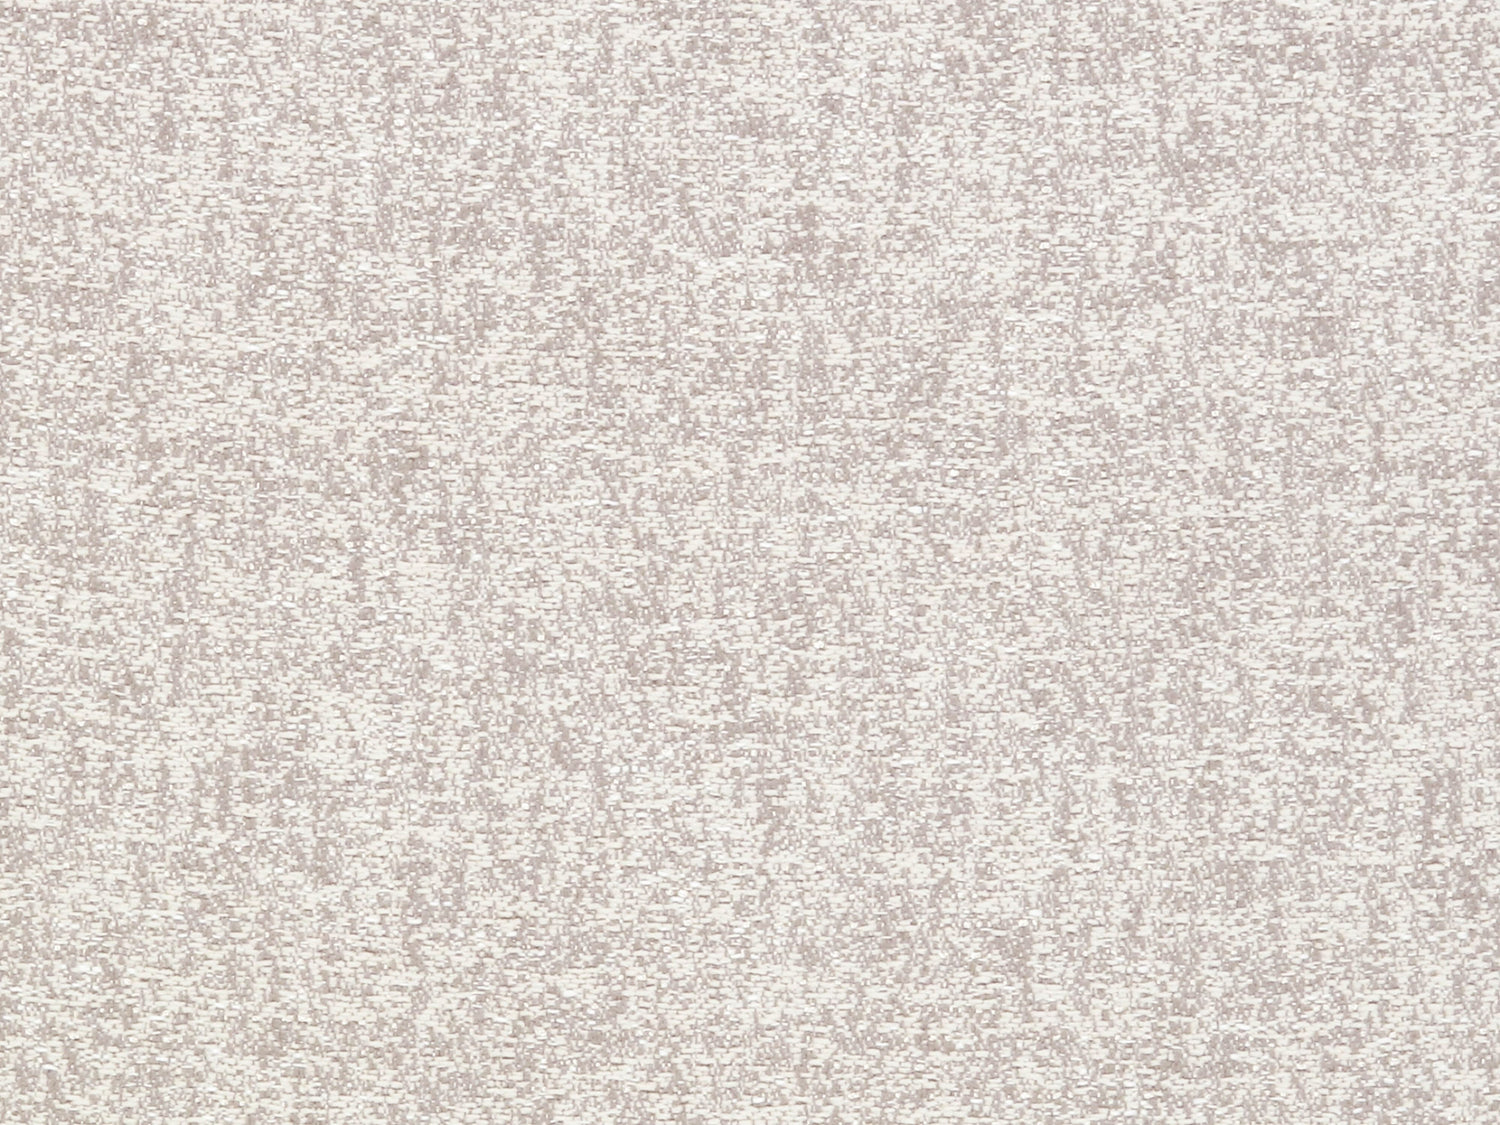 Belle Neige fabric in birch color - pattern number EY 0027D012 - by Scalamandre in the Old World Weavers collection